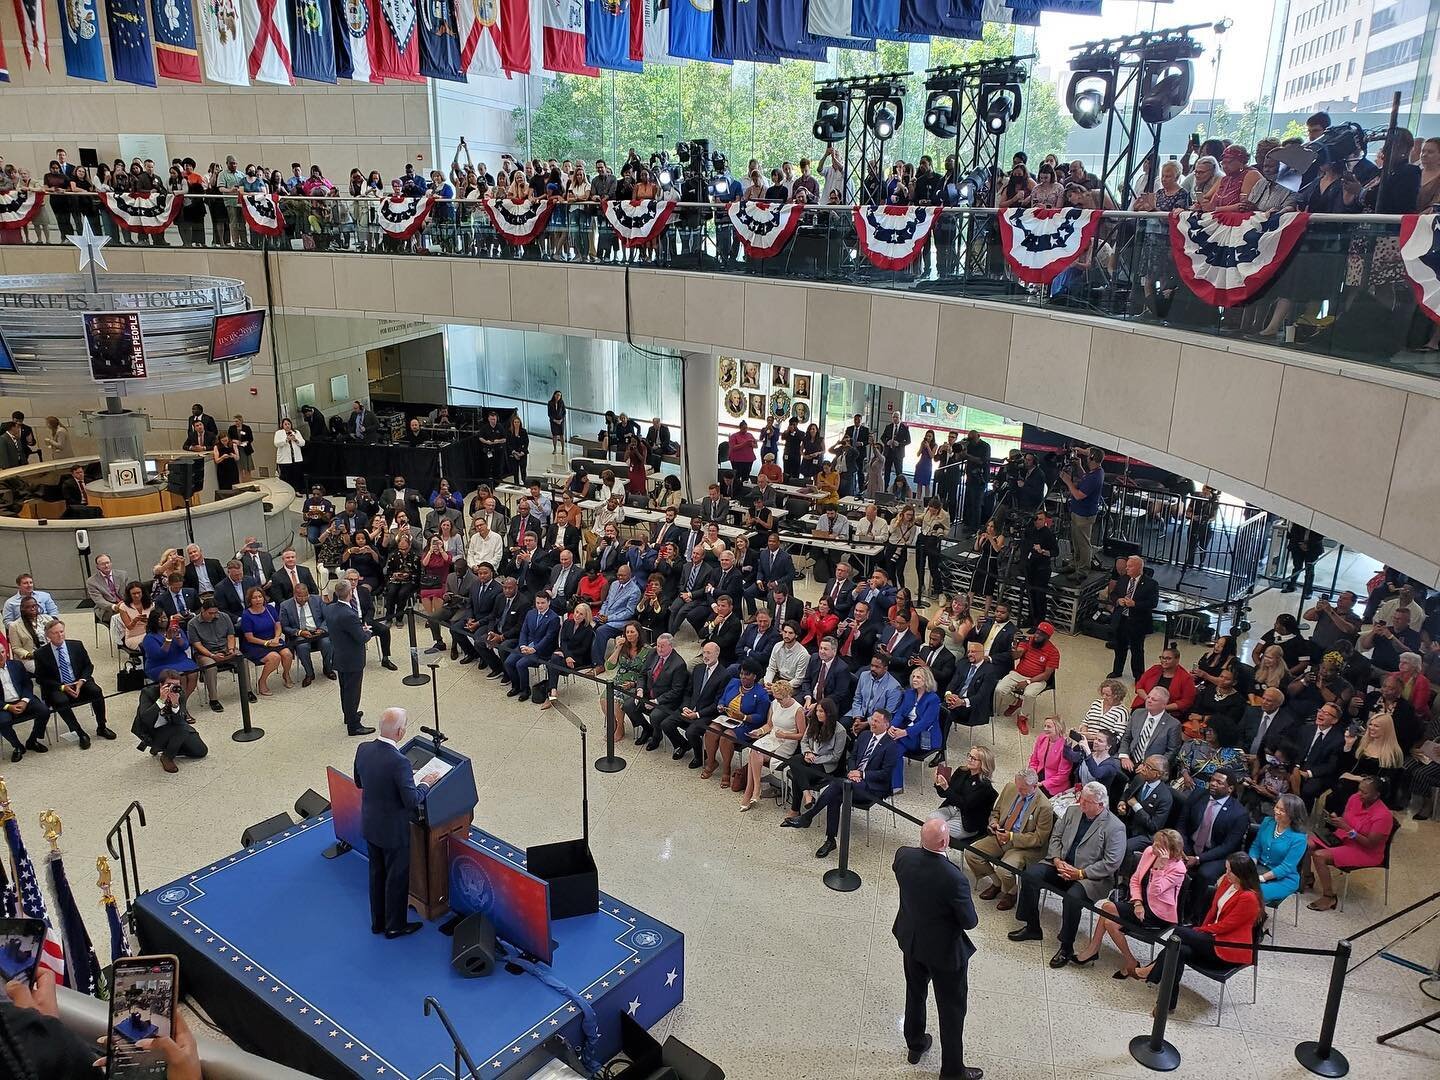 Today, President Biden visited Philadelphia to give a monumental speech on voting rights in the United States. 300 guests gathered in the National Constitution Center&rsquo;s Main Atrium to hear the President speak. Among those who were in attendance